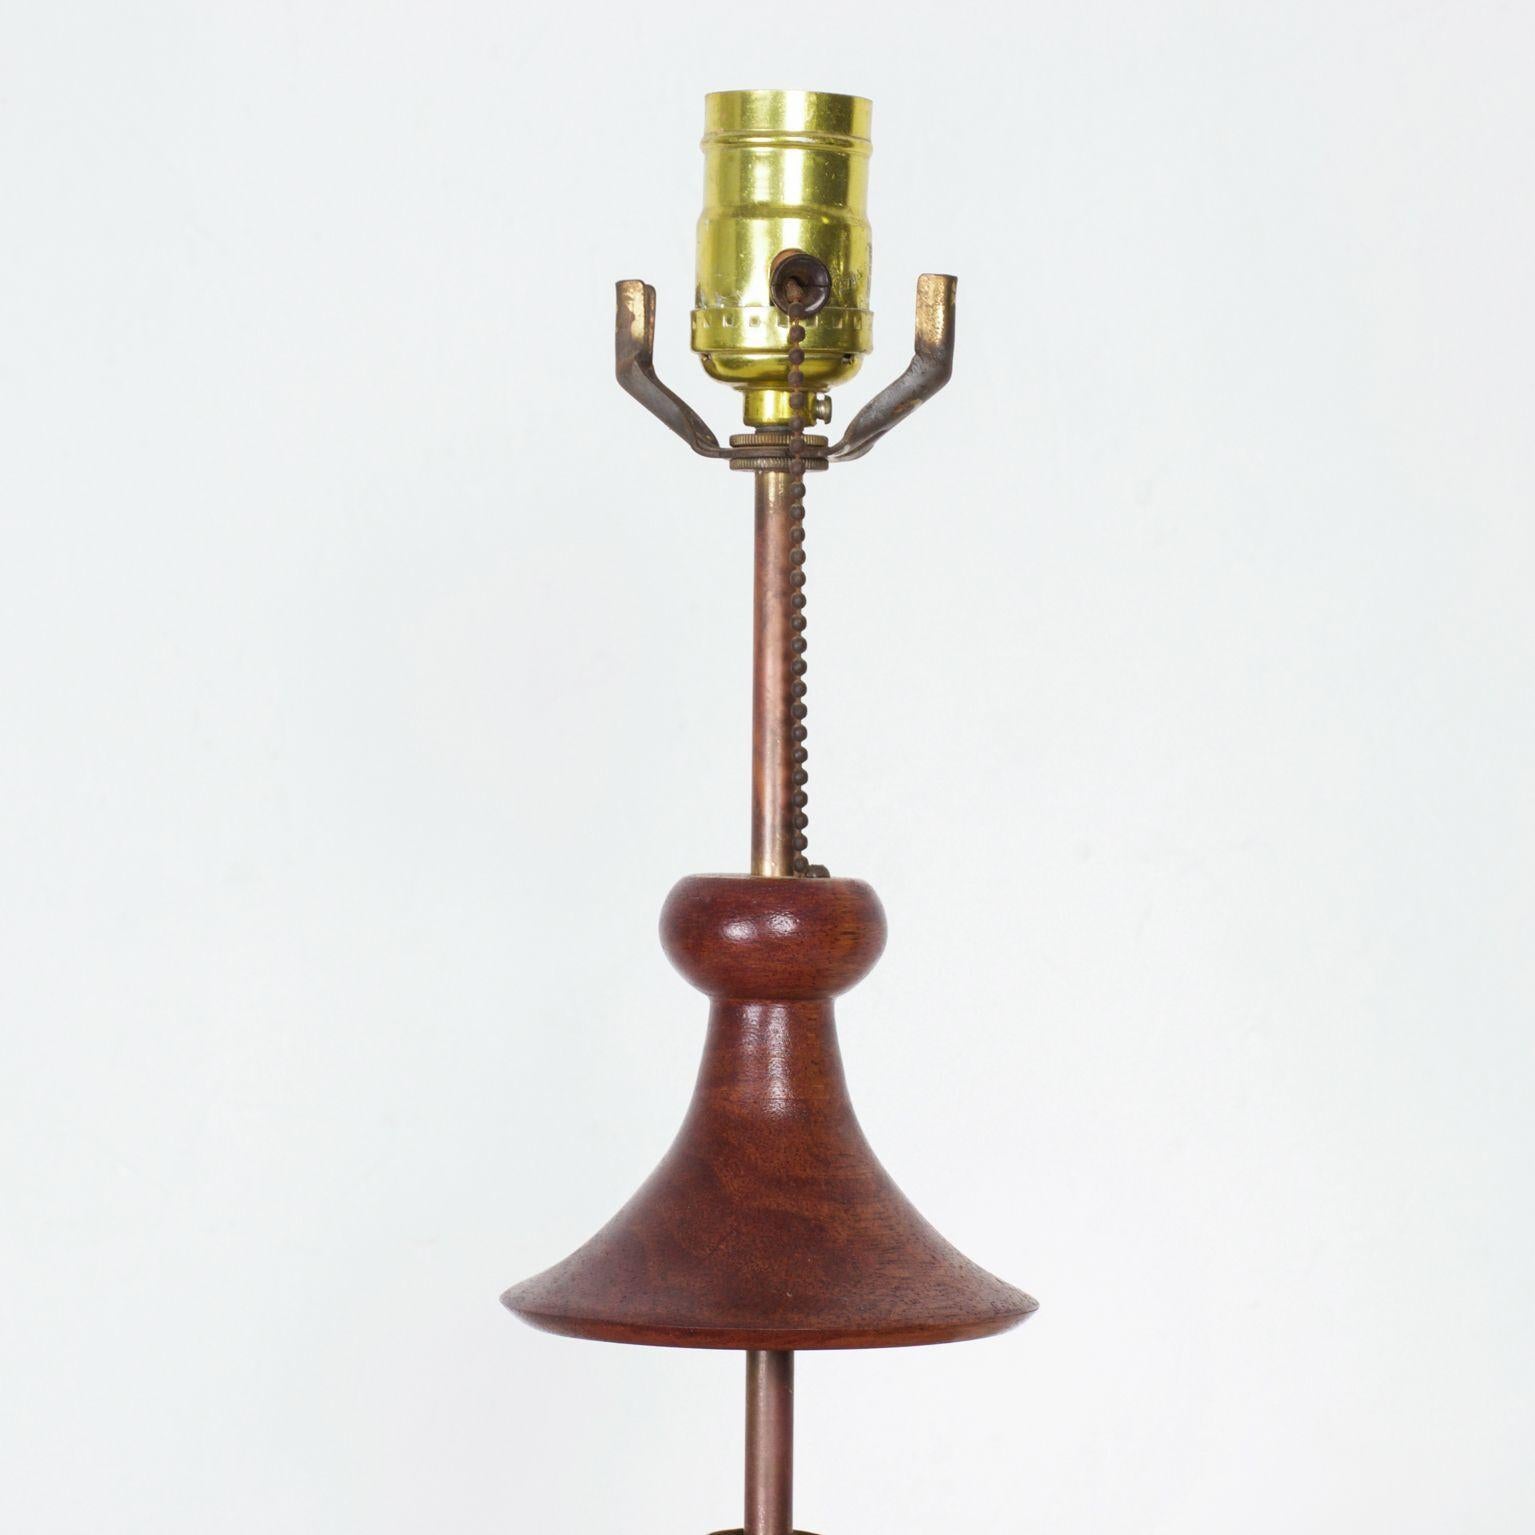 American 1950s Solid Walnut & Brass Table Lamp Sculptural Style Tony Paul, Westwood CA